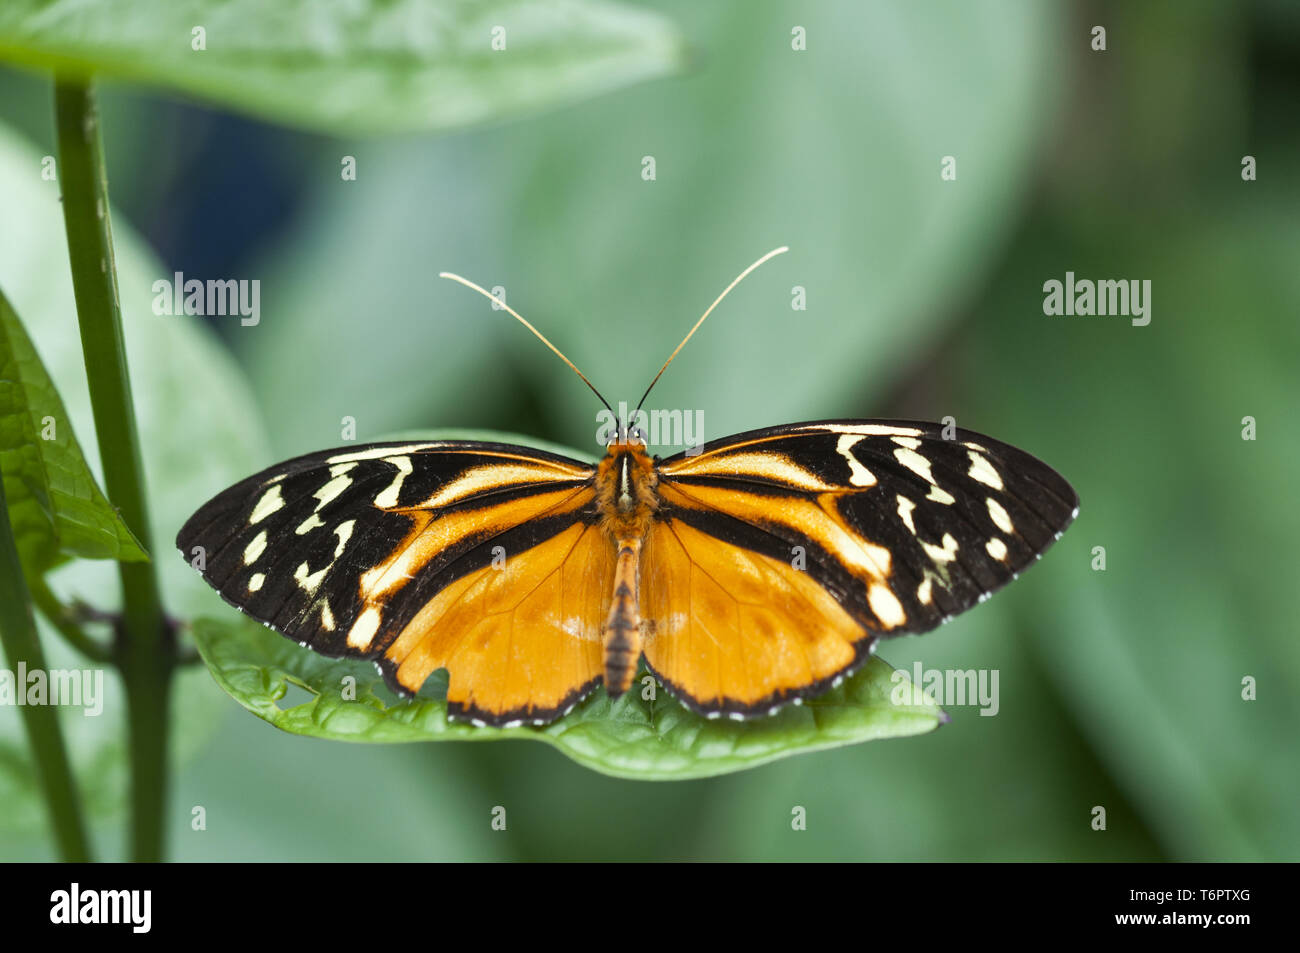 Butterfly, lepidoptera, Passion butterfly, Heliconius Stock Photo